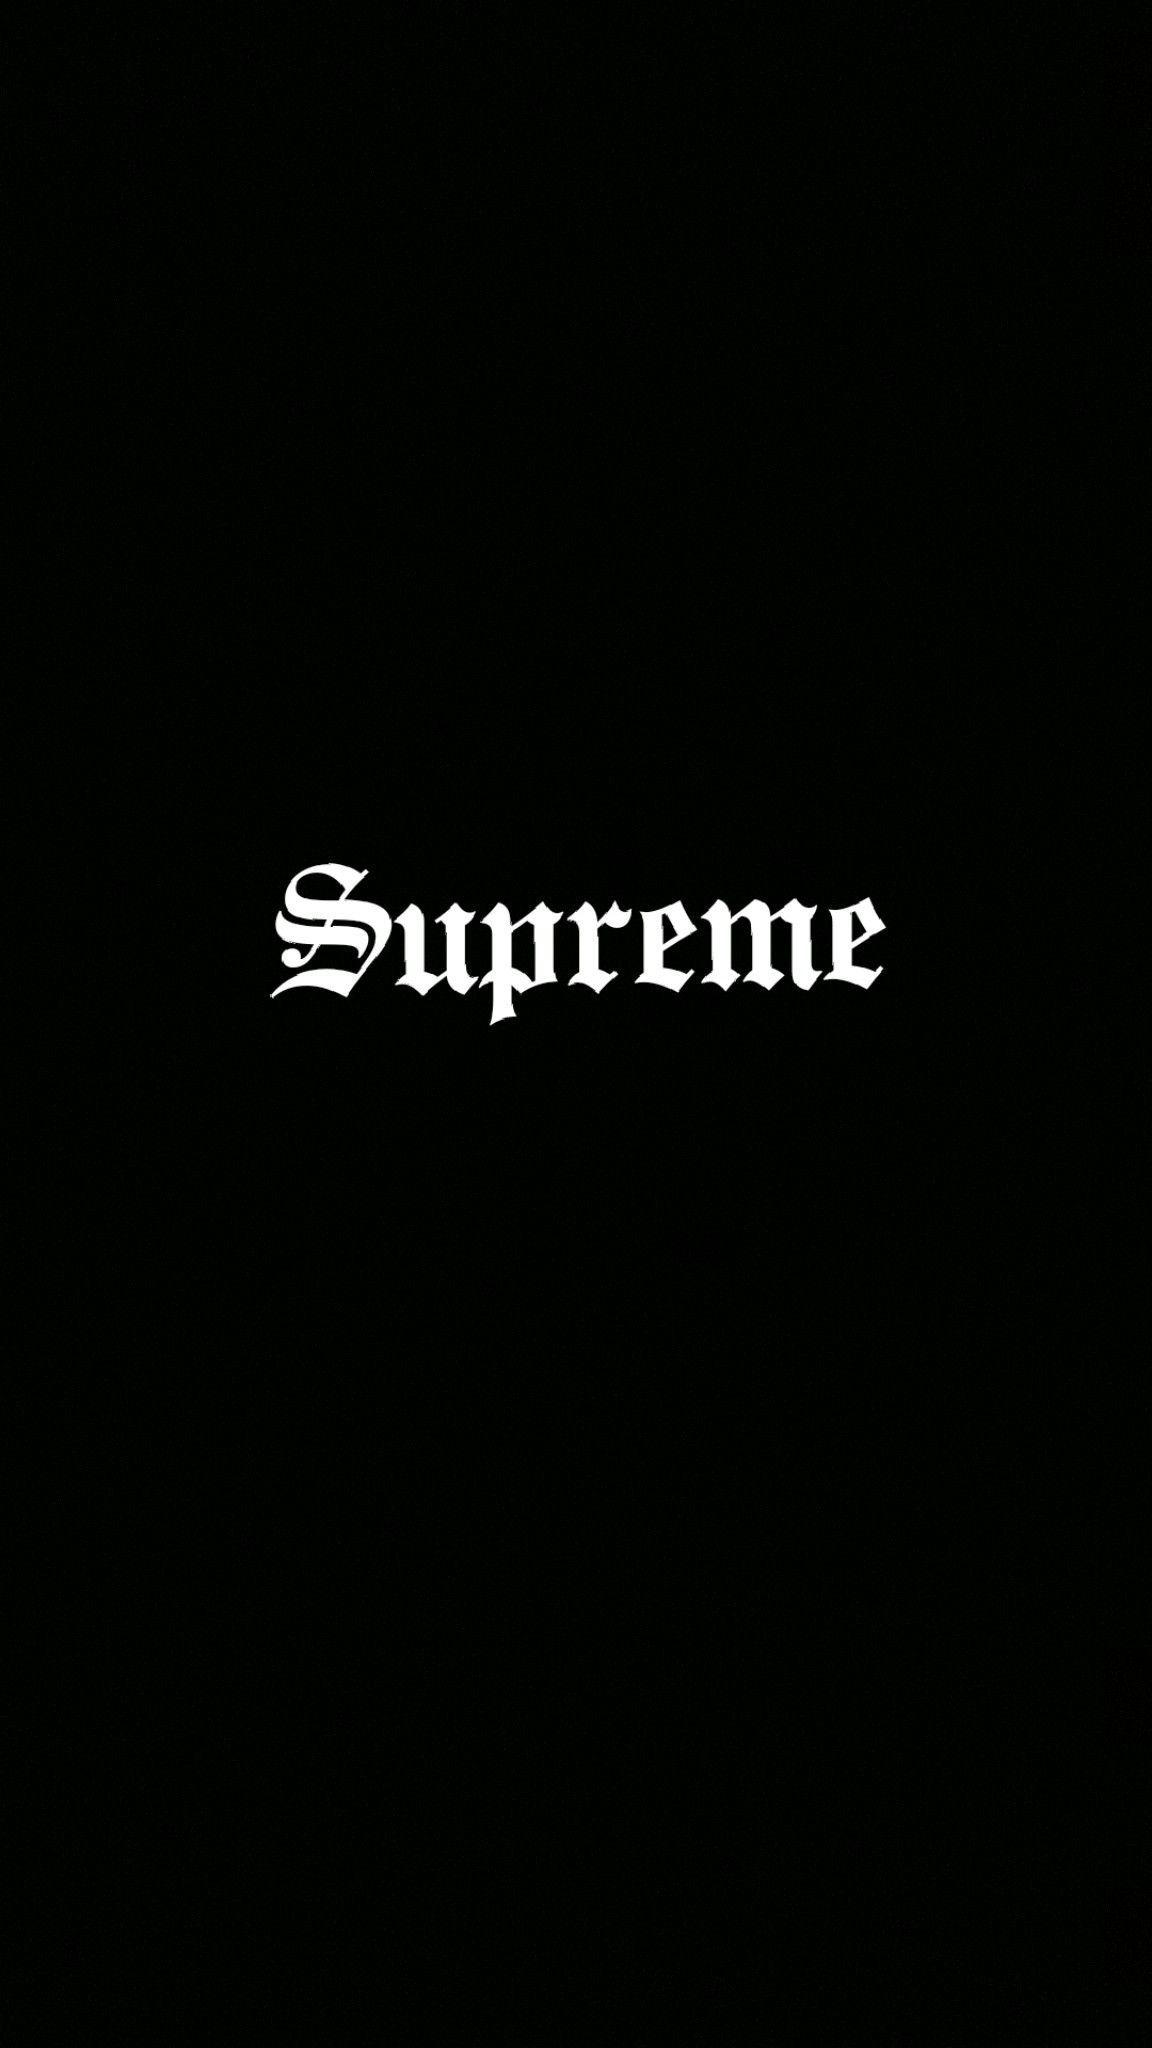 Supreme Black and White Wallpapers - Top Free Supreme Black and White